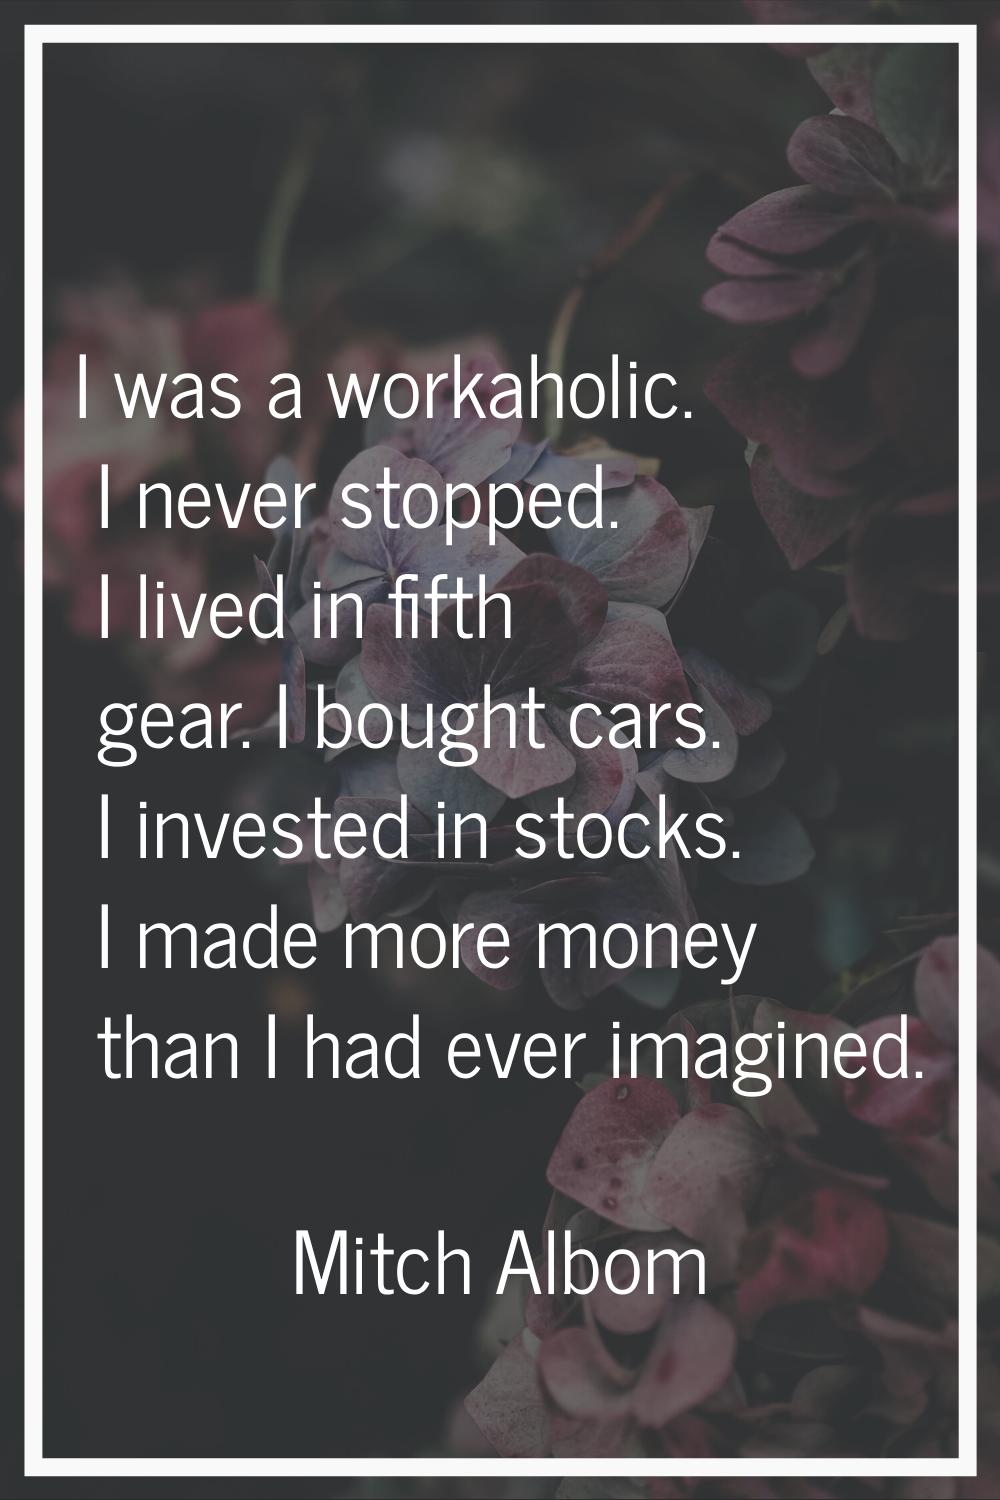 I was a workaholic. I never stopped. I lived in fifth gear. I bought cars. I invested in stocks. I 